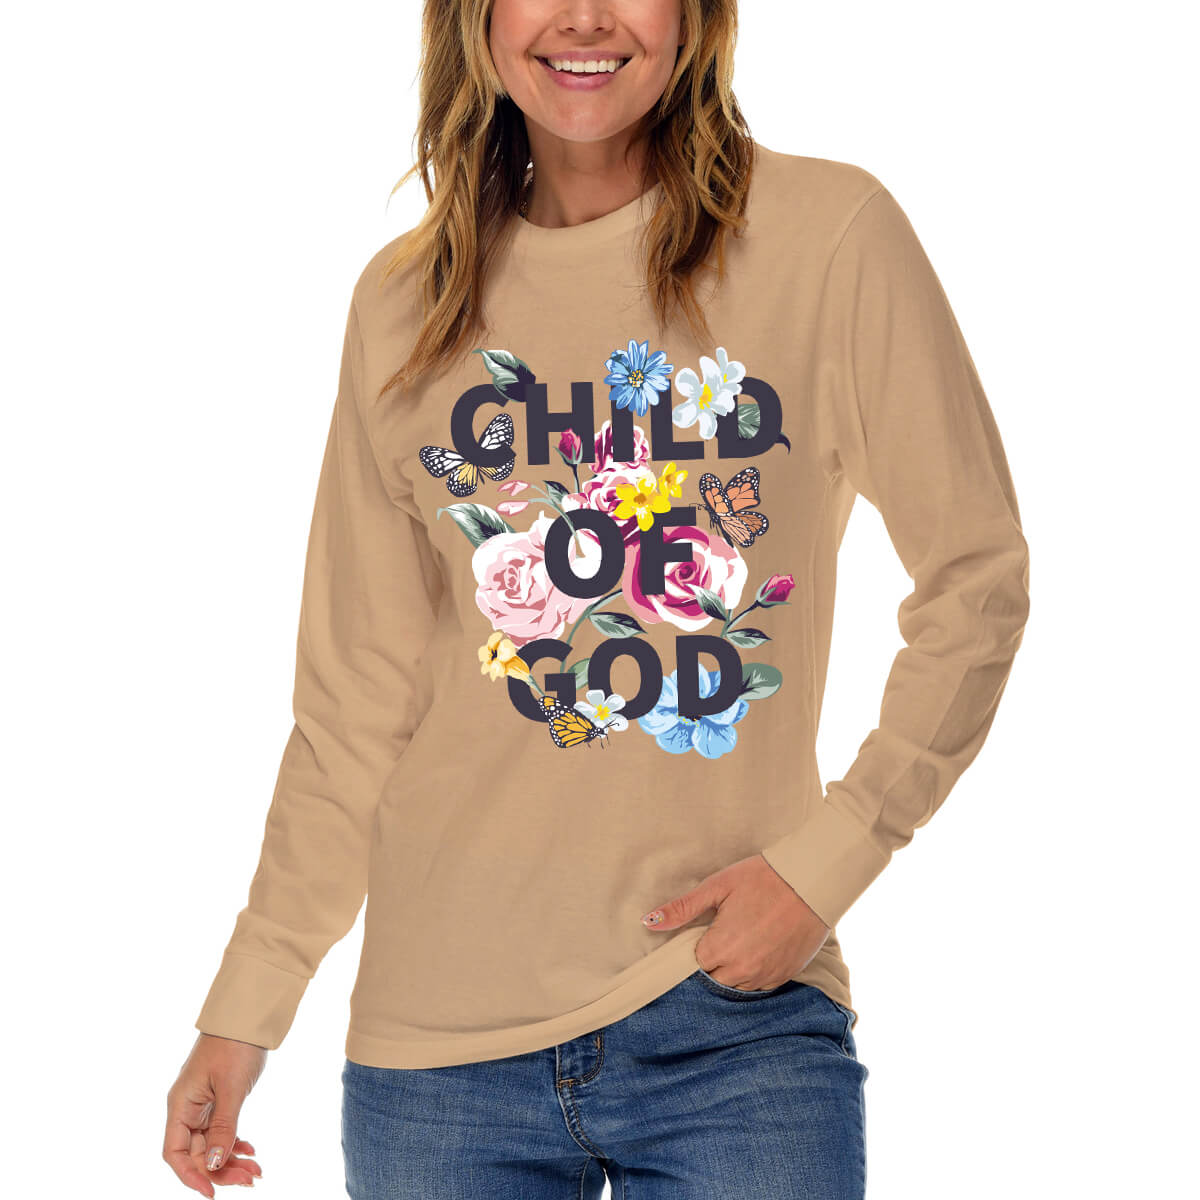 Child Of God Floral Long Sleeve T Shirt